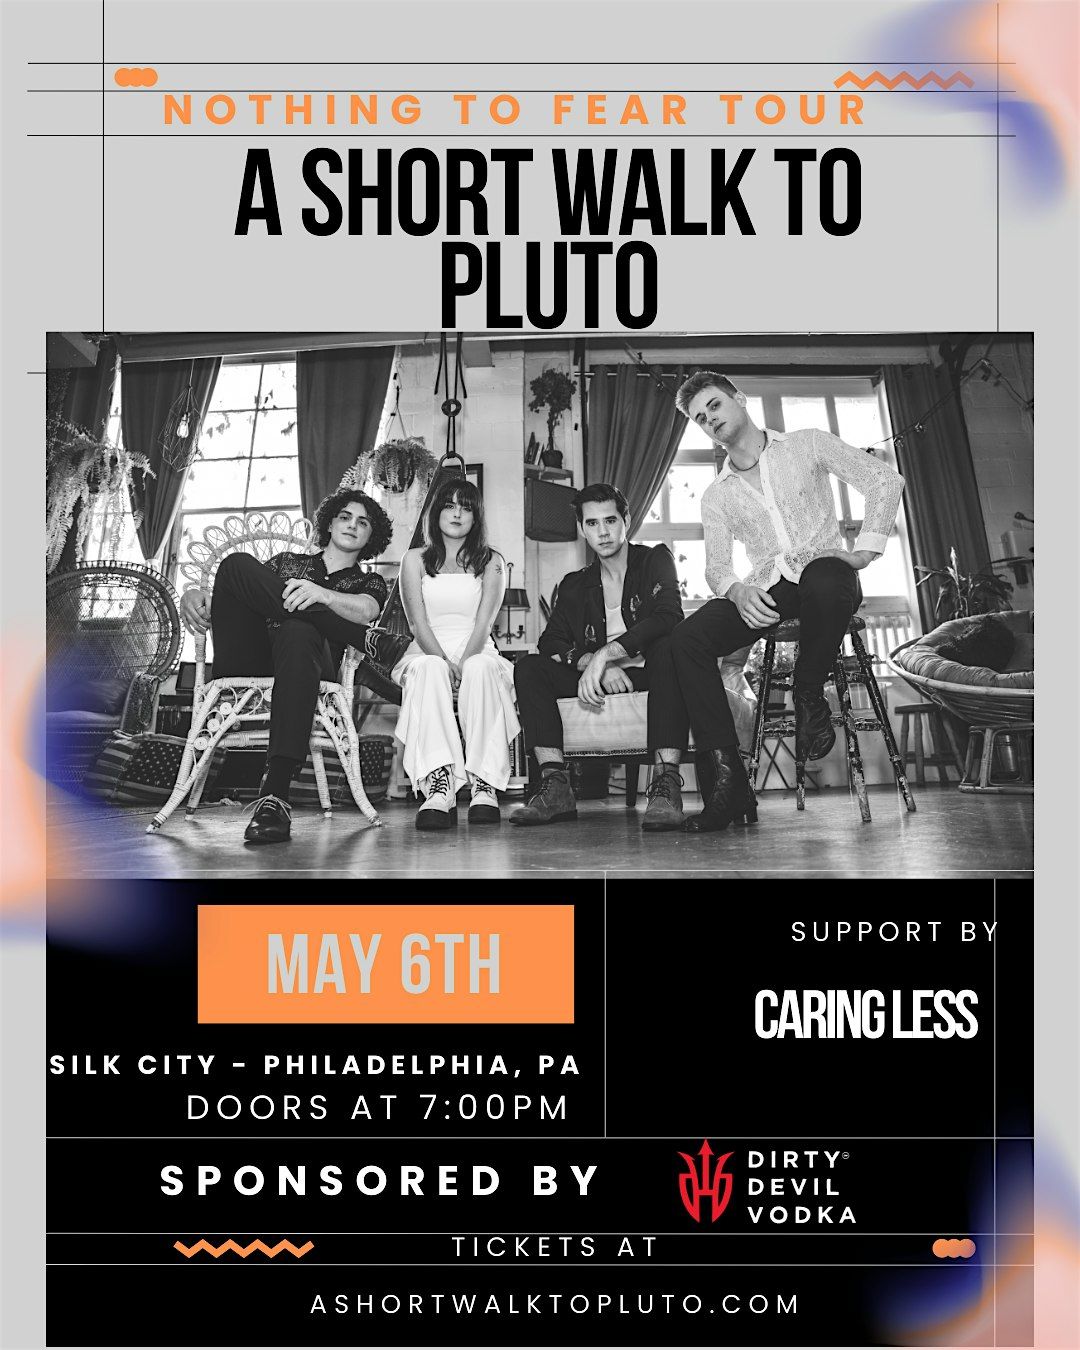 A Short Walk to Pluto: Nothing To Fear Tour